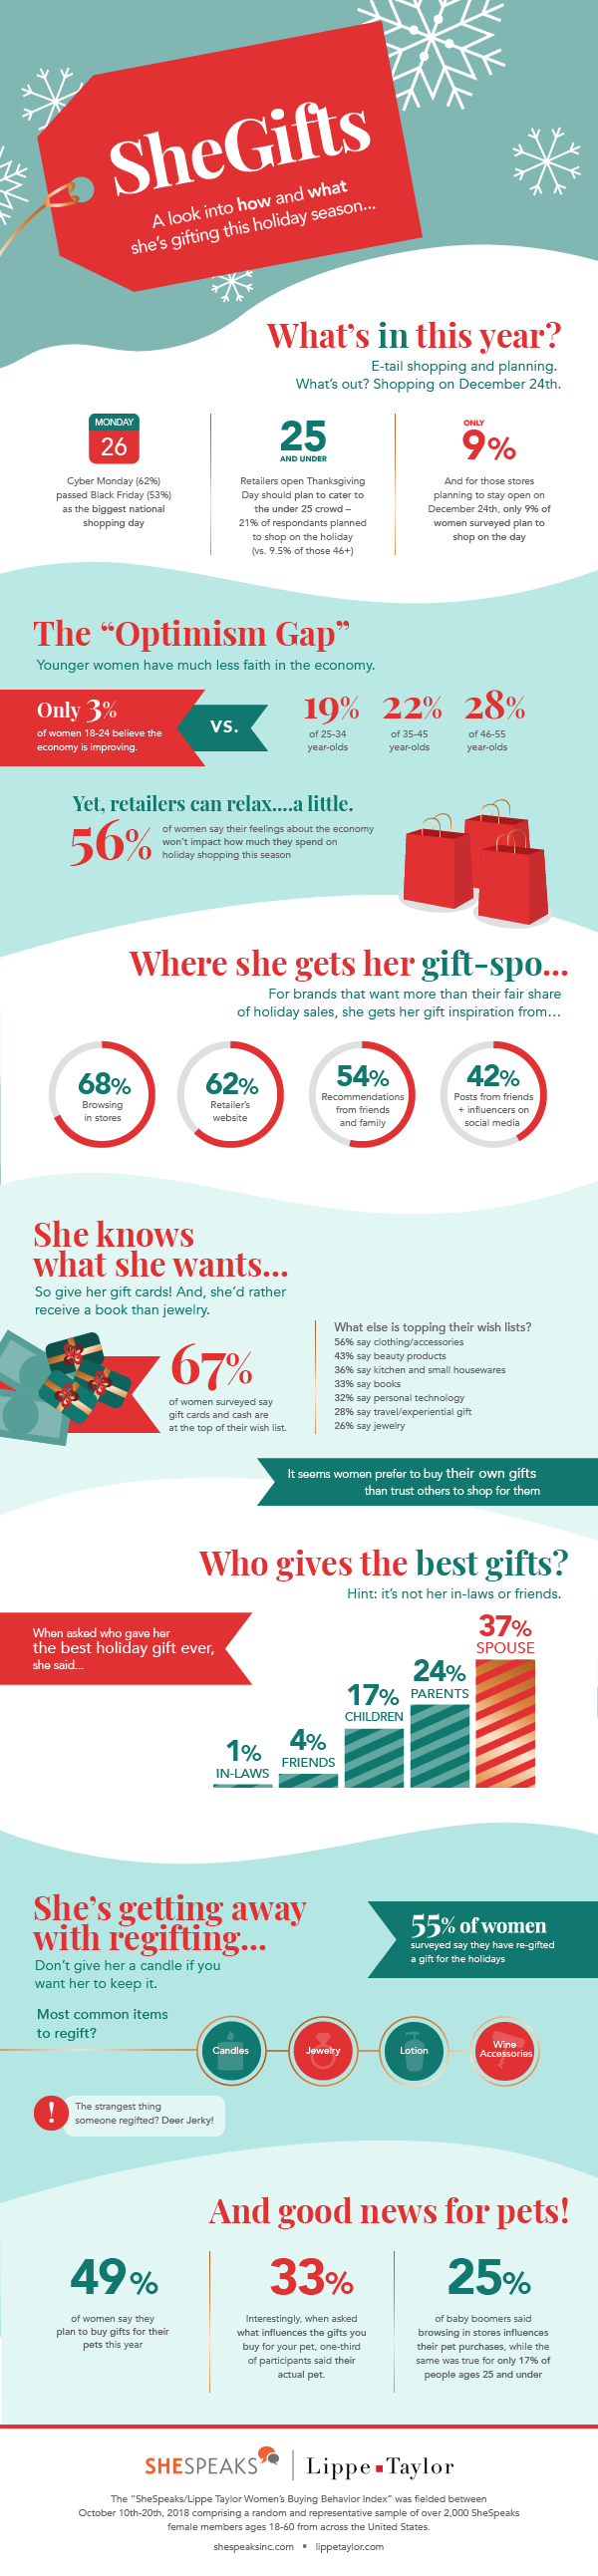 2018 Holiday Buying Trends for Women